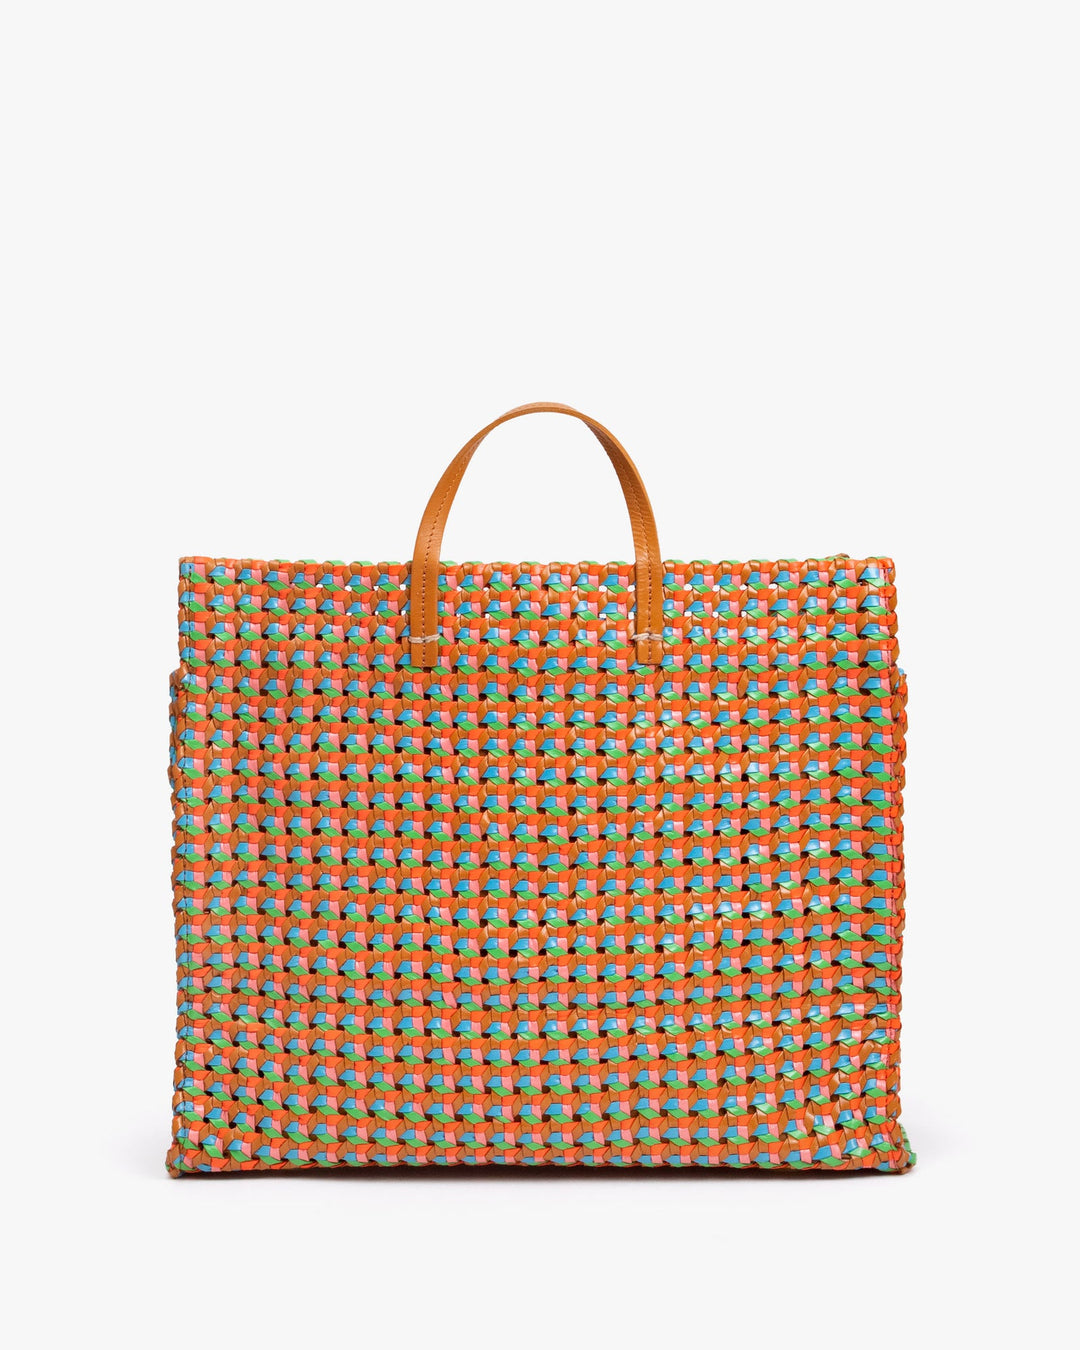 Clare V. - Simple Tote in Natural with Multi Rattan